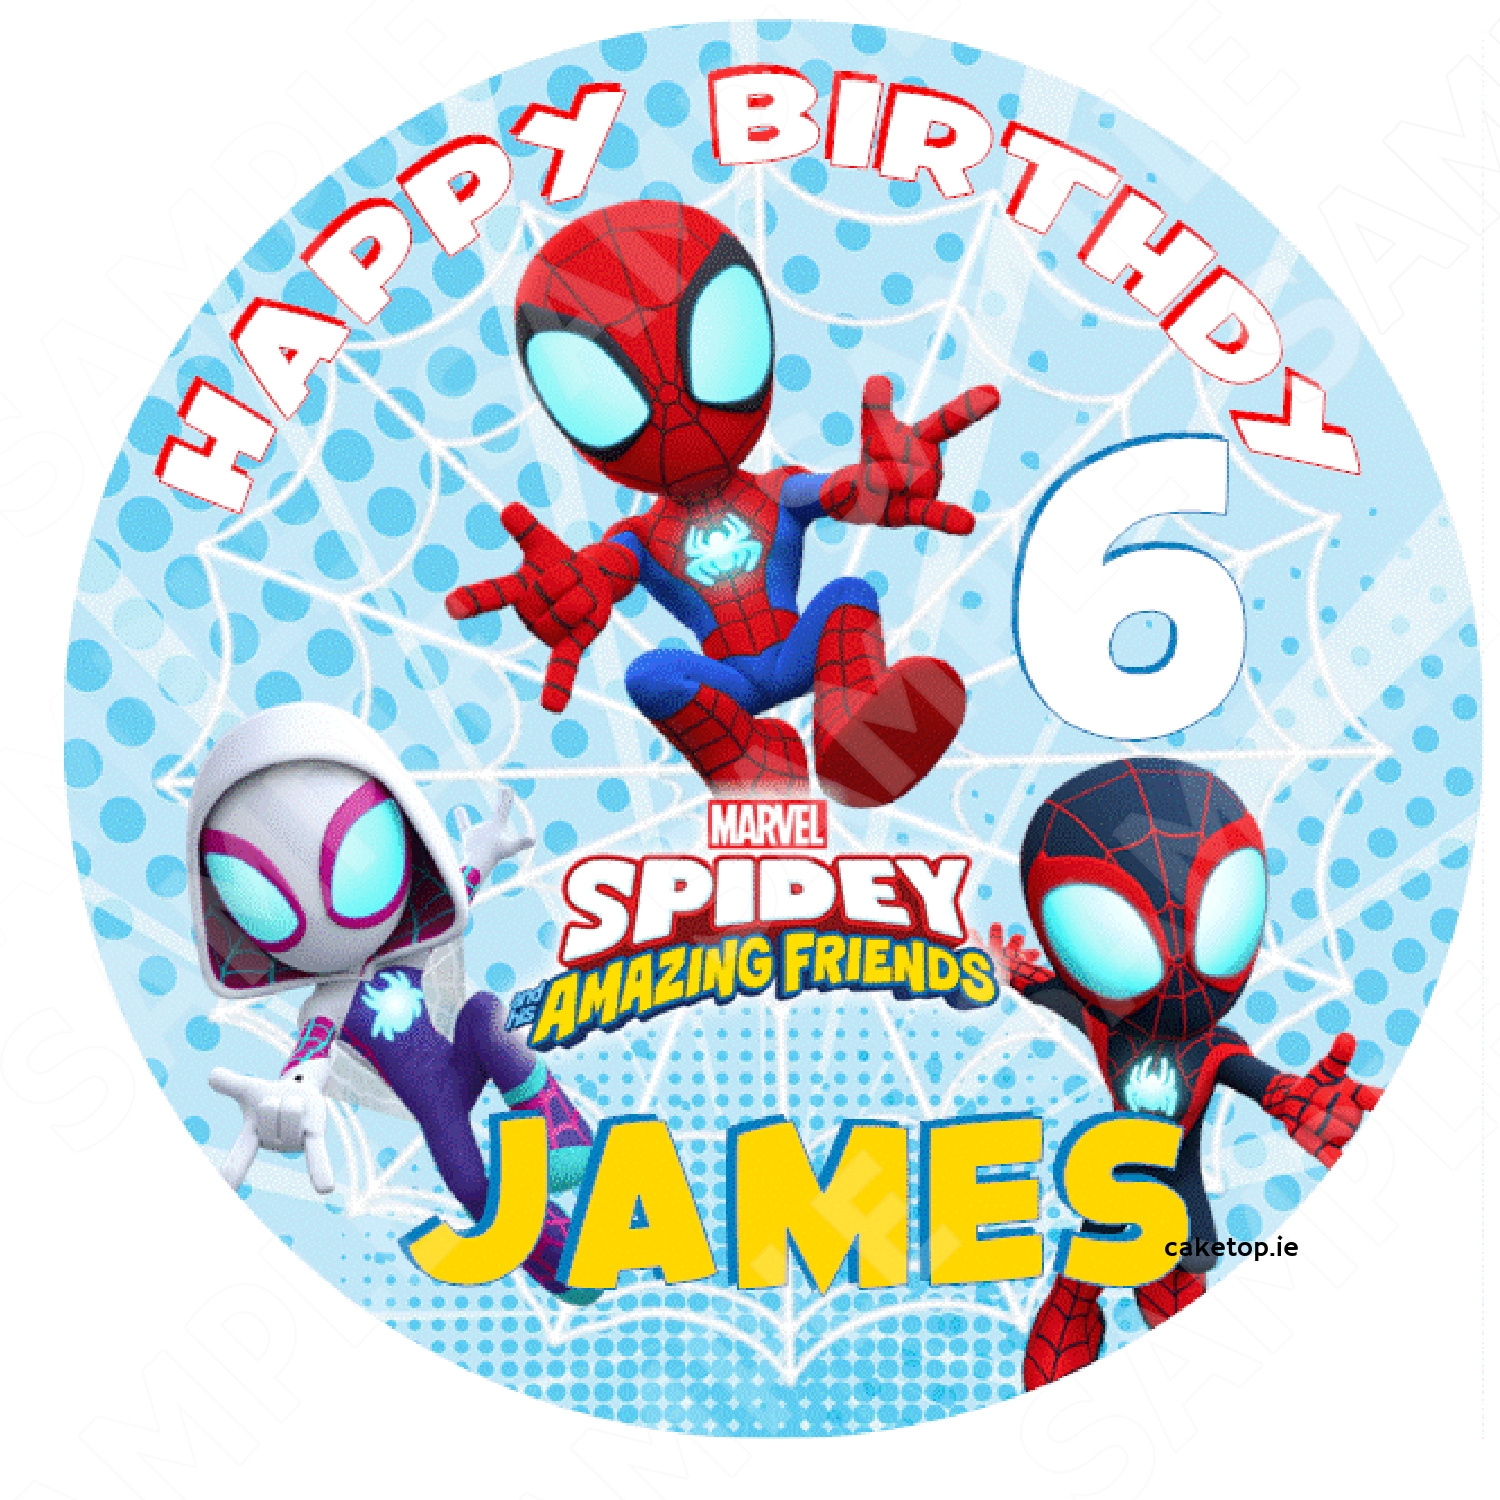 Spiderman Edible Print Edible Cake Toppers Edible Picture Caketop ie